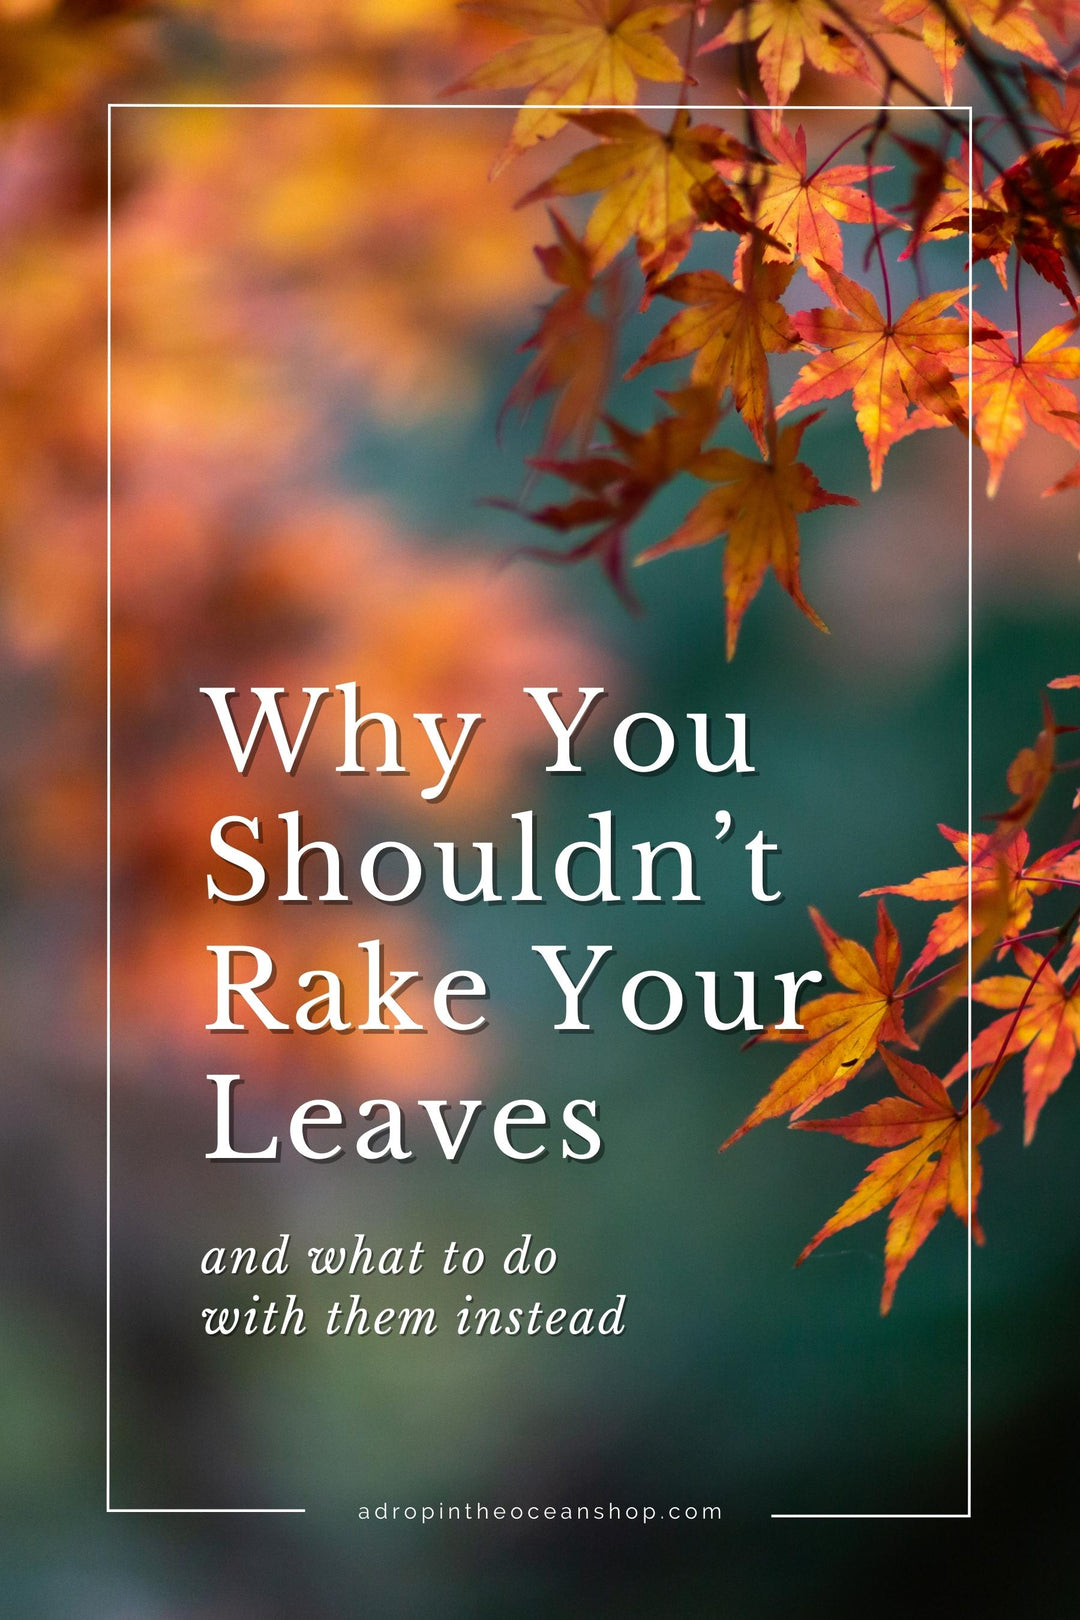 A Drop in the Ocean Zero Waste Store: Why You Shouldn't Rake Your Leaves This Fall